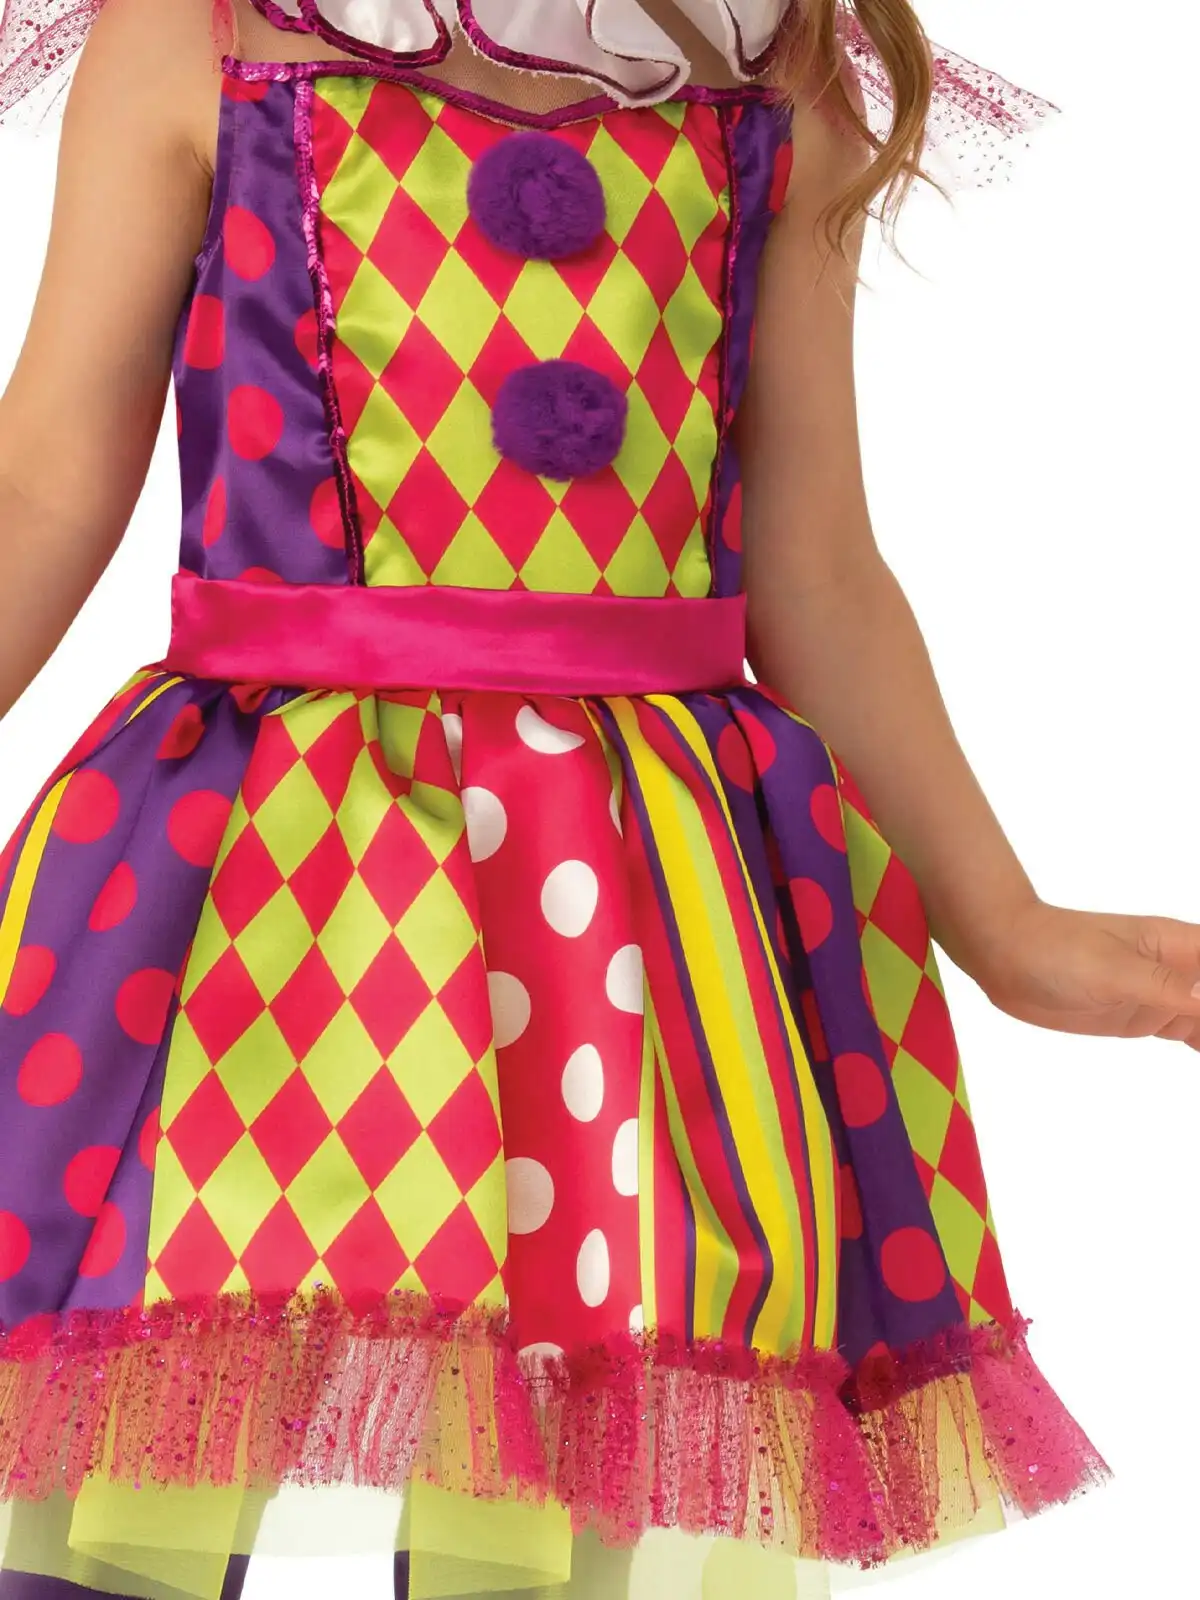 Rubies Bright Clown Dress Up Kids/Girls Halloween Circus Party Costume Size L